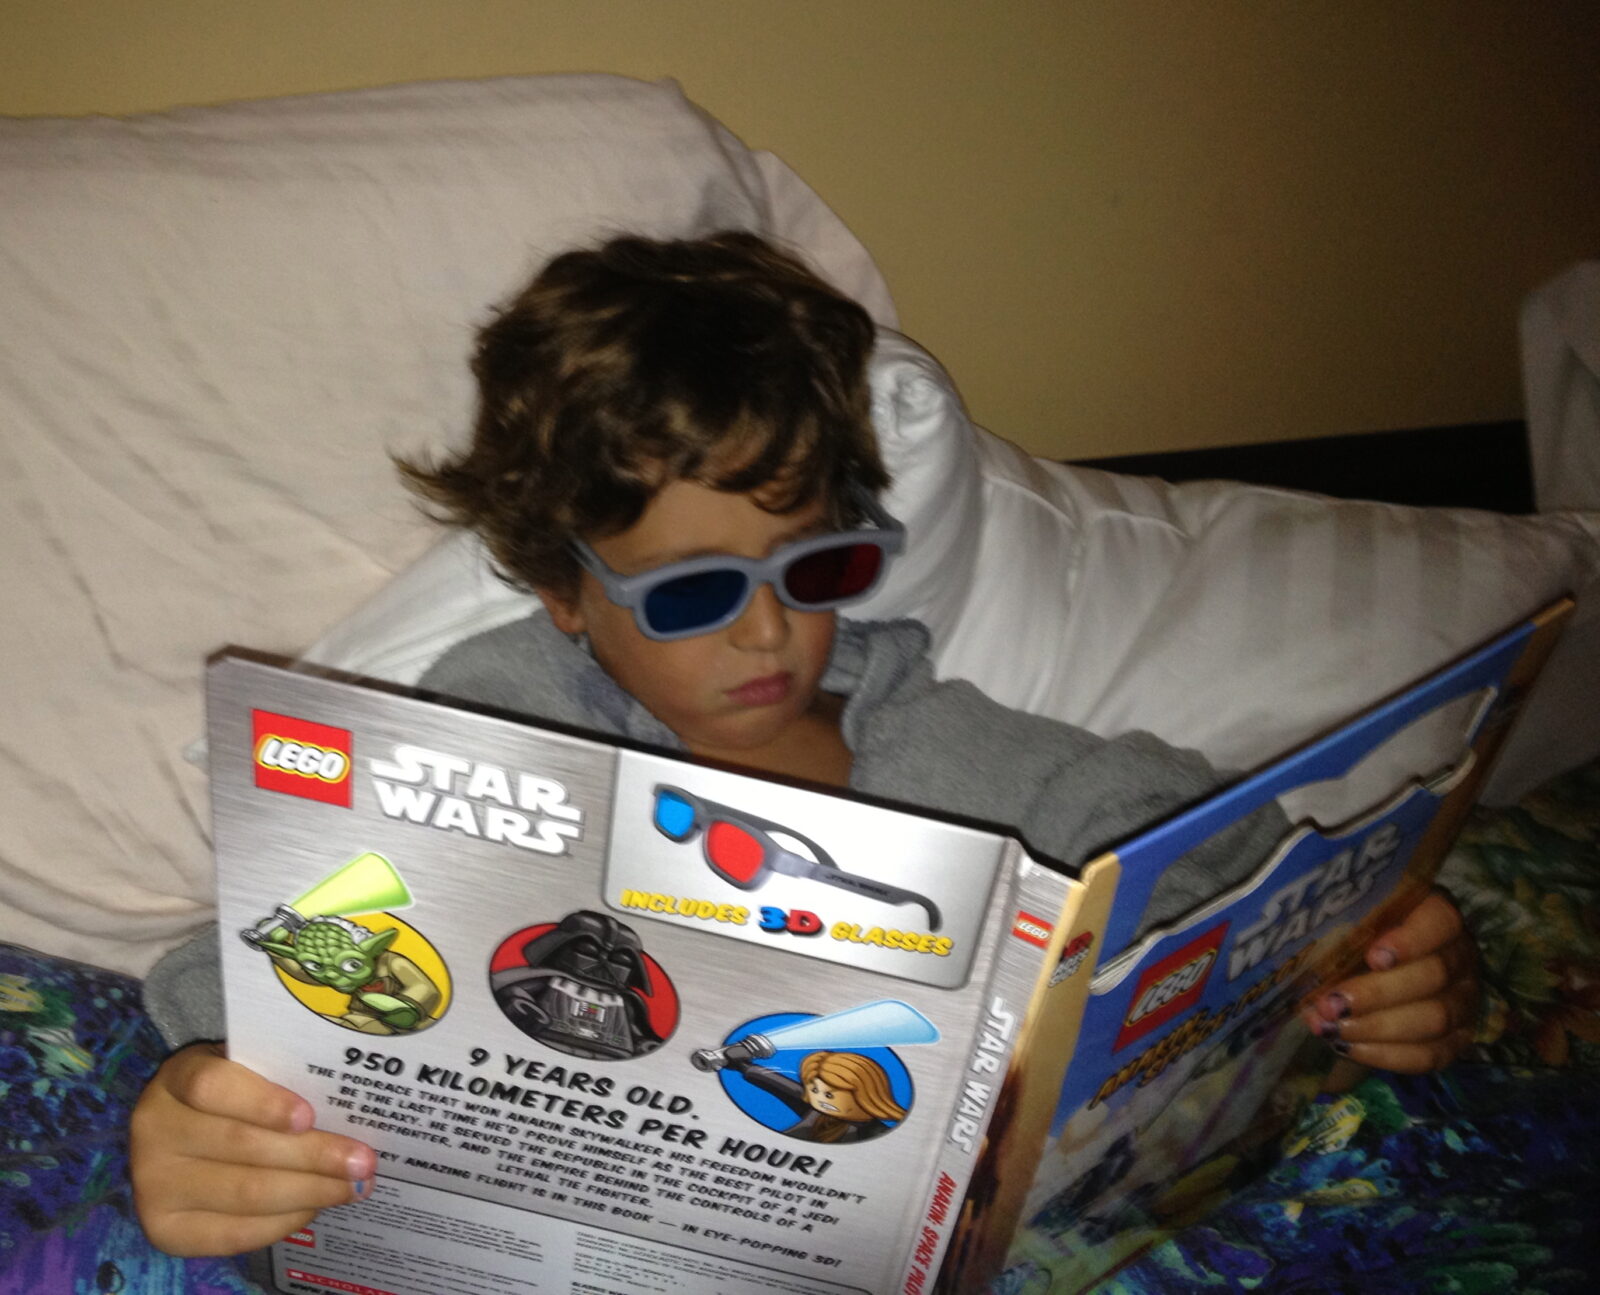 Cool kid reading with glasses